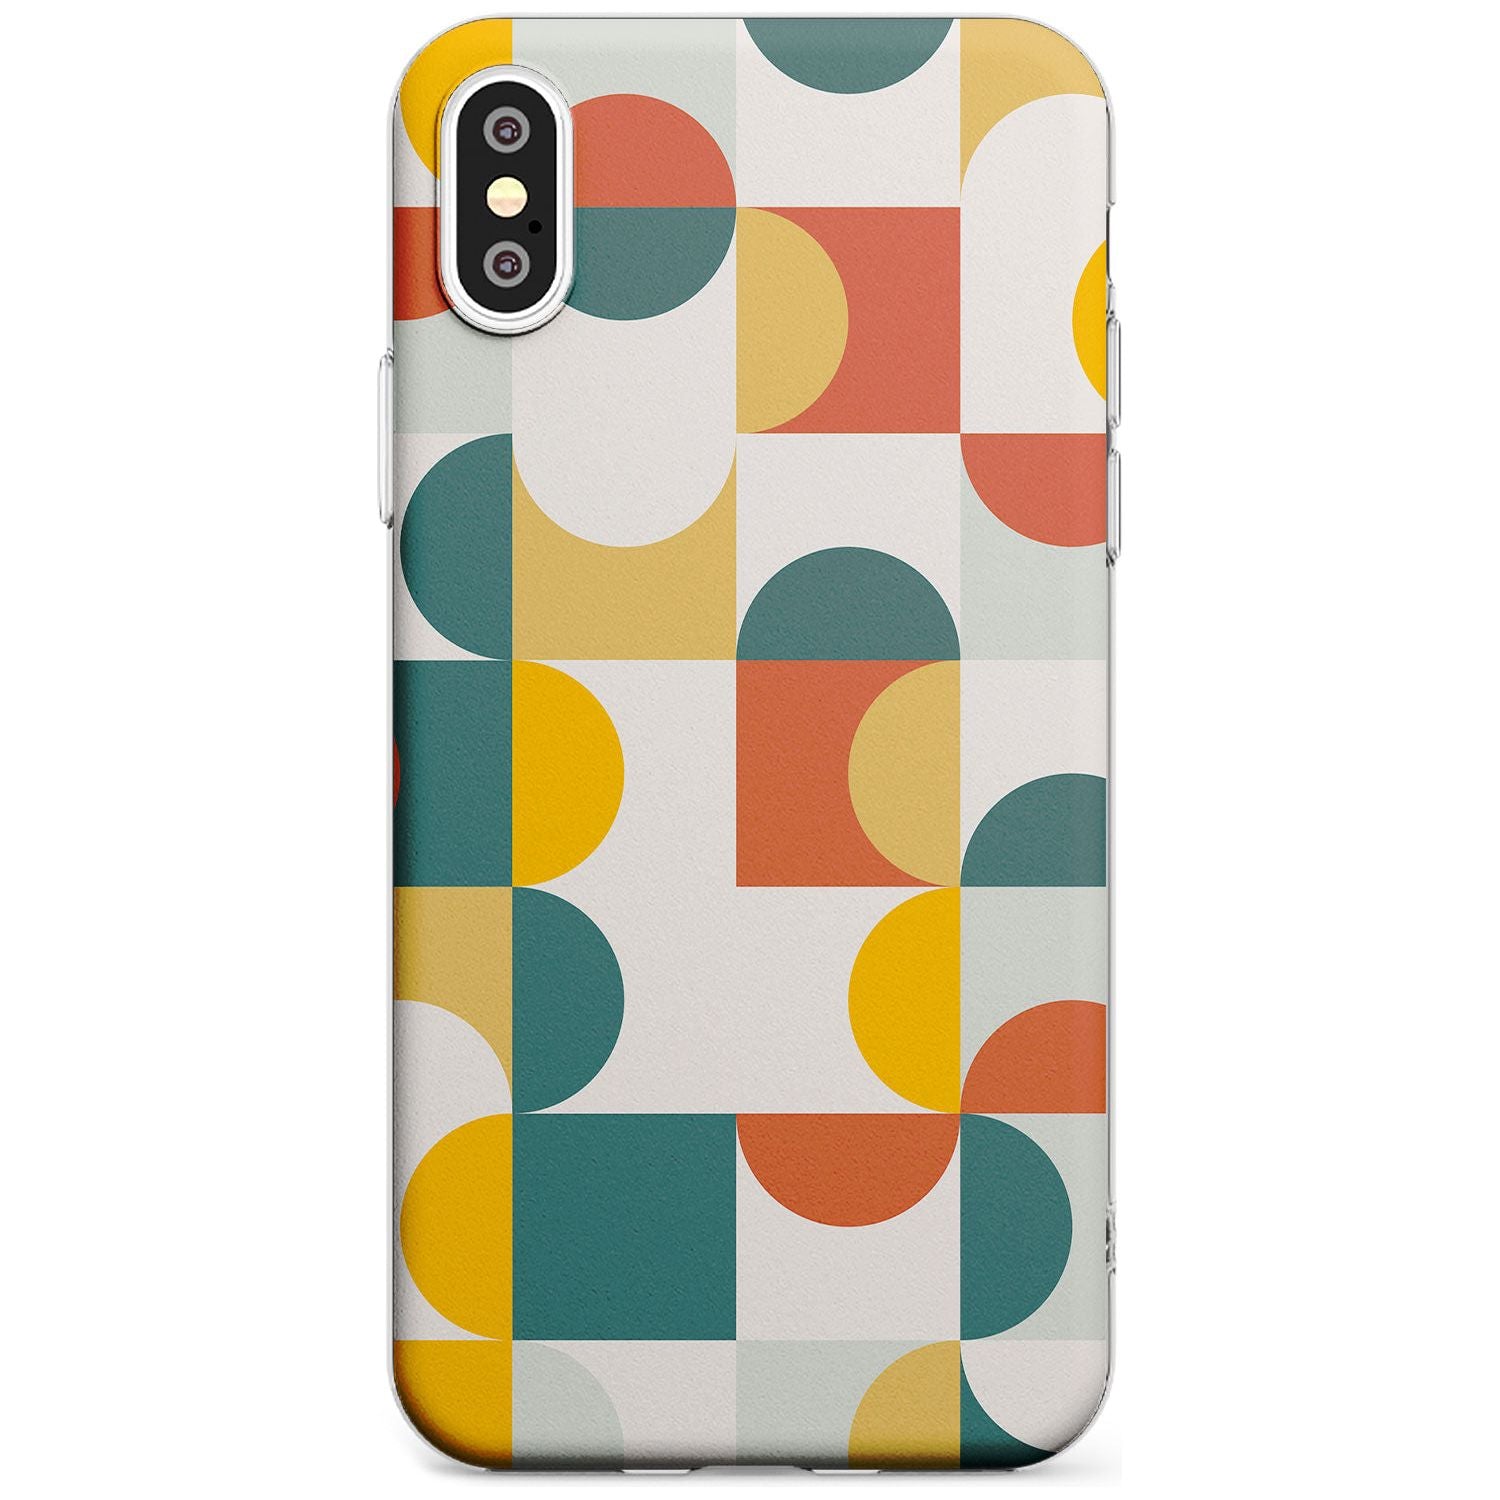 Abstract Retro Shapes: Muted Colour Mix Black Impact Phone Case for iPhone X XS Max XR